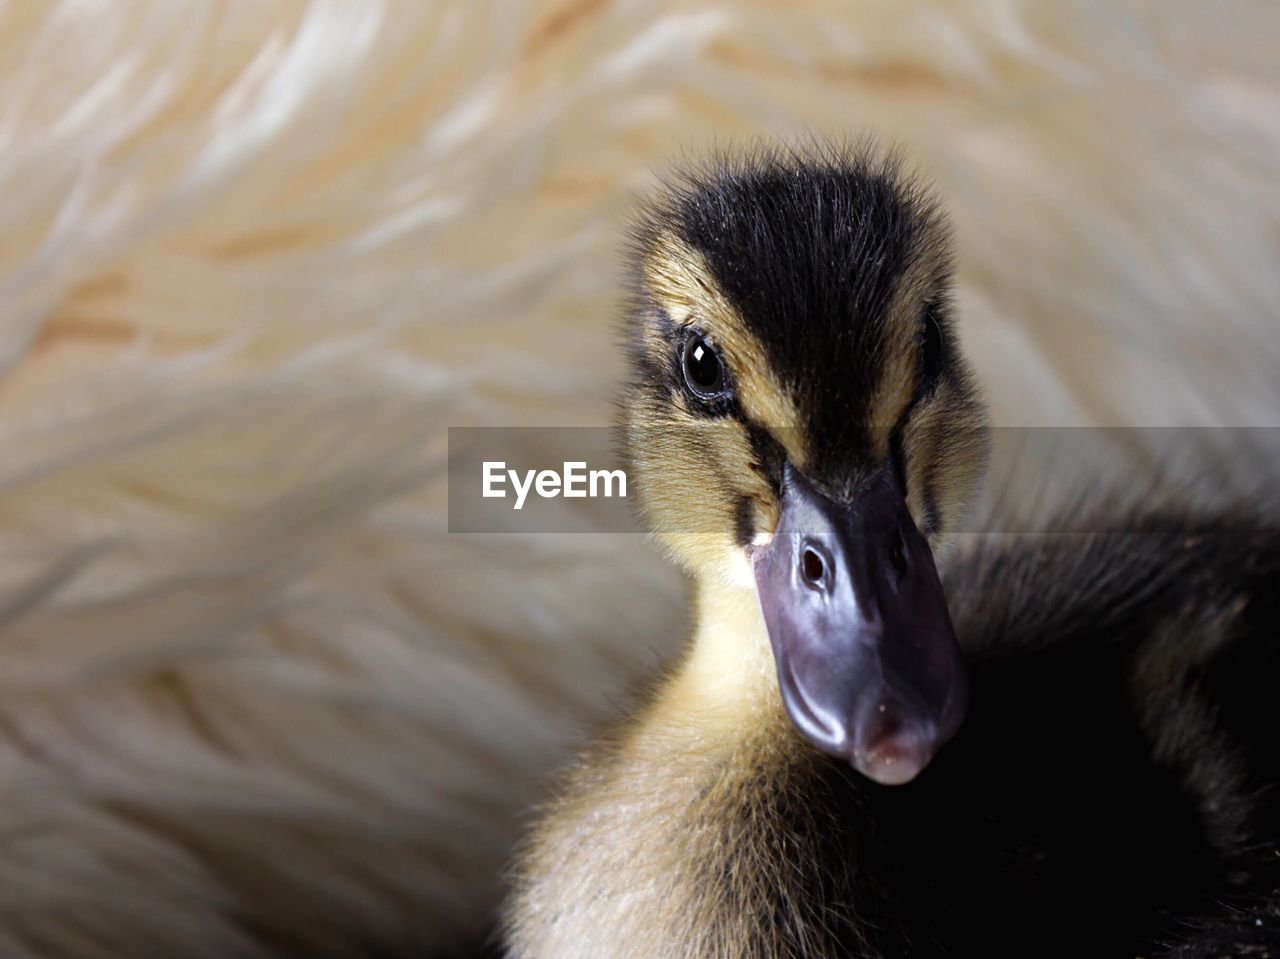 Close-up of duckling